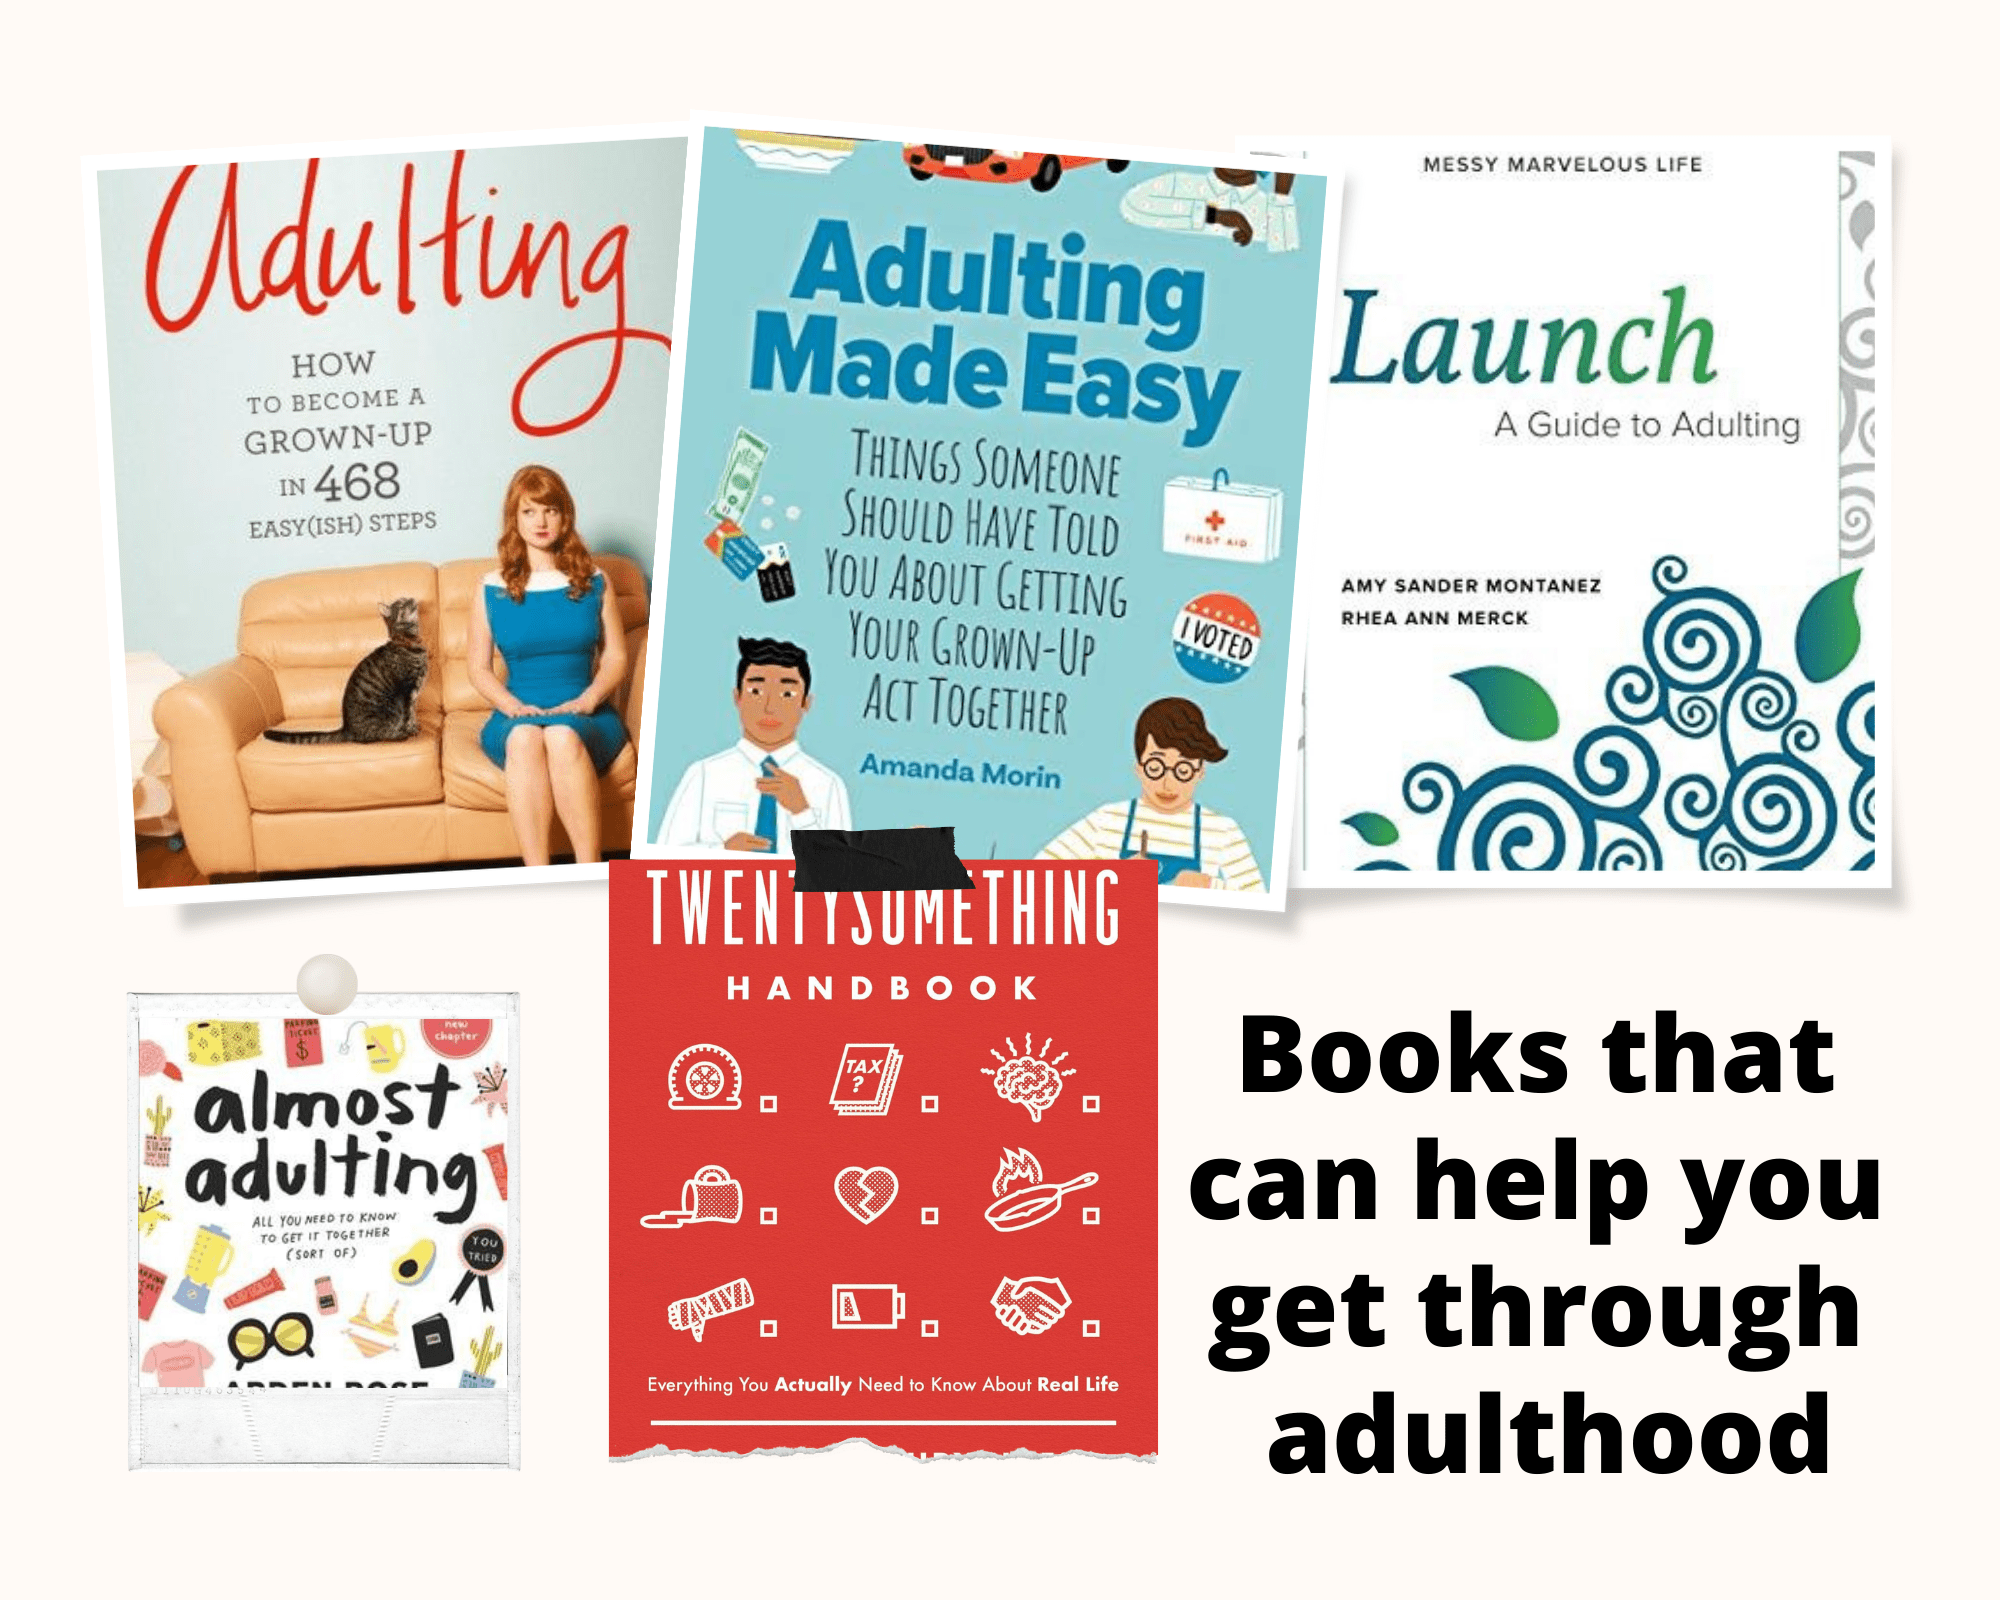 Adulting can be tricky; Time to refer to some manuals